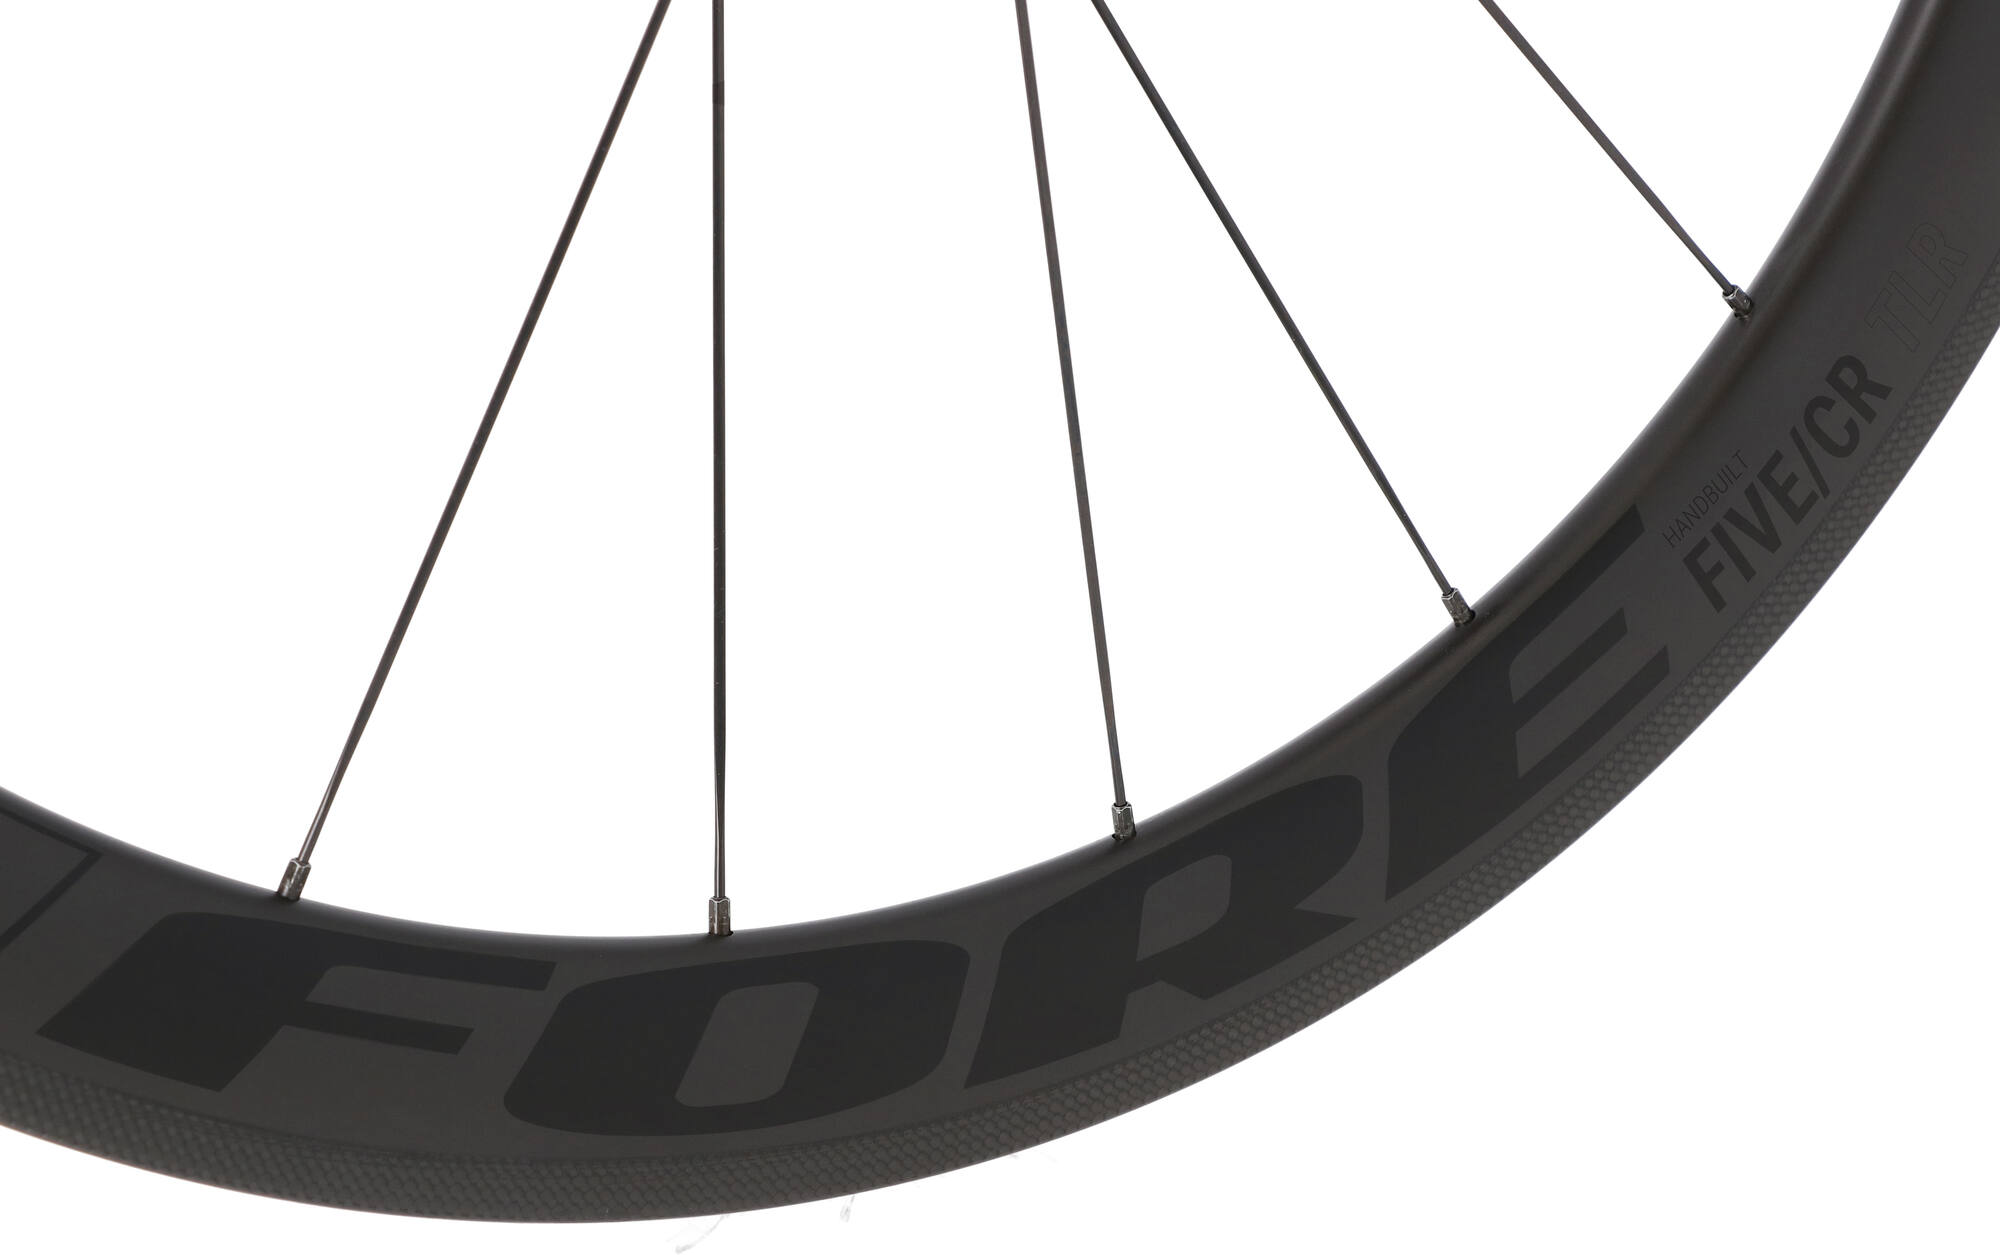 Fore - Five CR DT350 Shimano wheelset including 2x Goodyear Eagle F1 700X25C